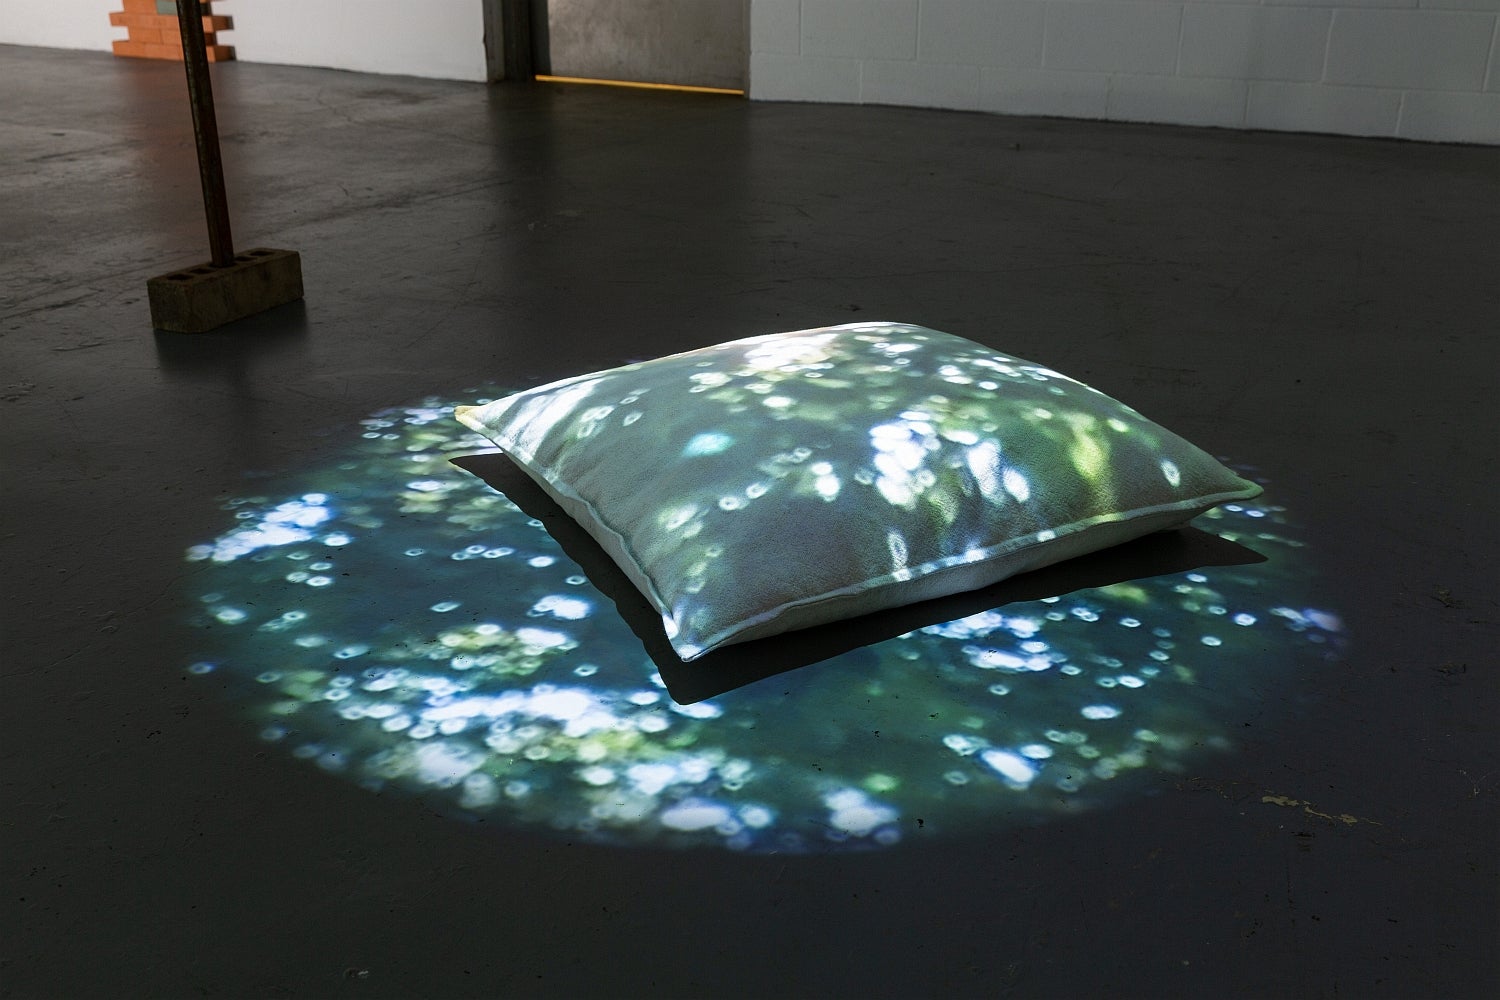 Artwork of a digital projector shining the image of dappled sunlight on a pillow on the floor.